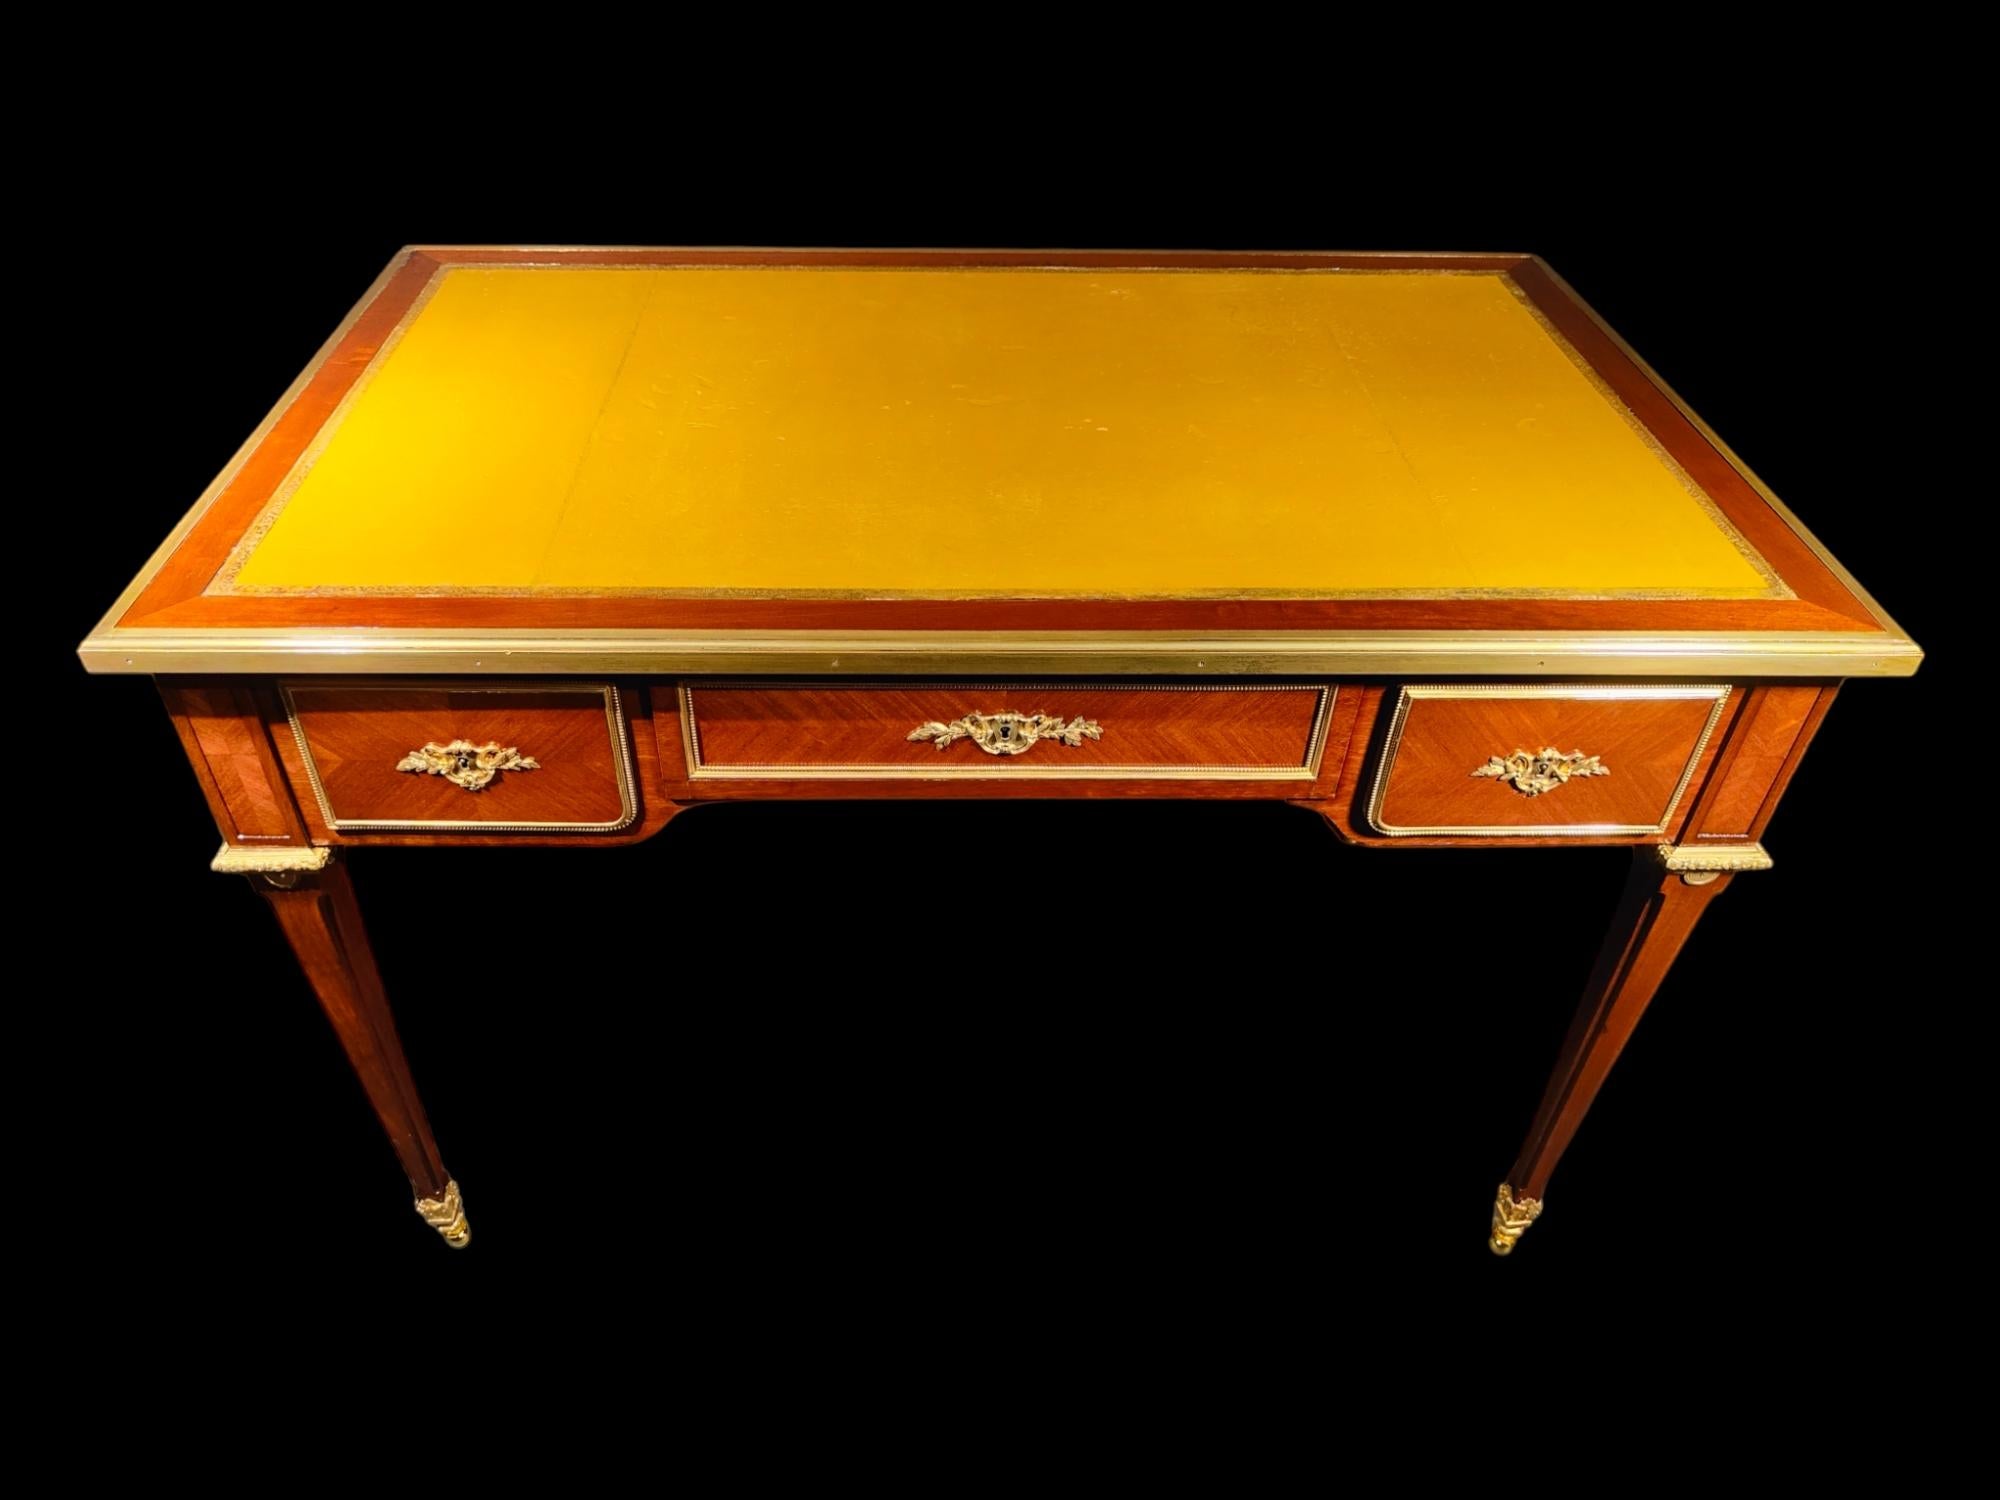 Very Fine Gilt Bronze Mounted Tulipwood and Amaranth Desk by L. Cueunieres For Sale 4